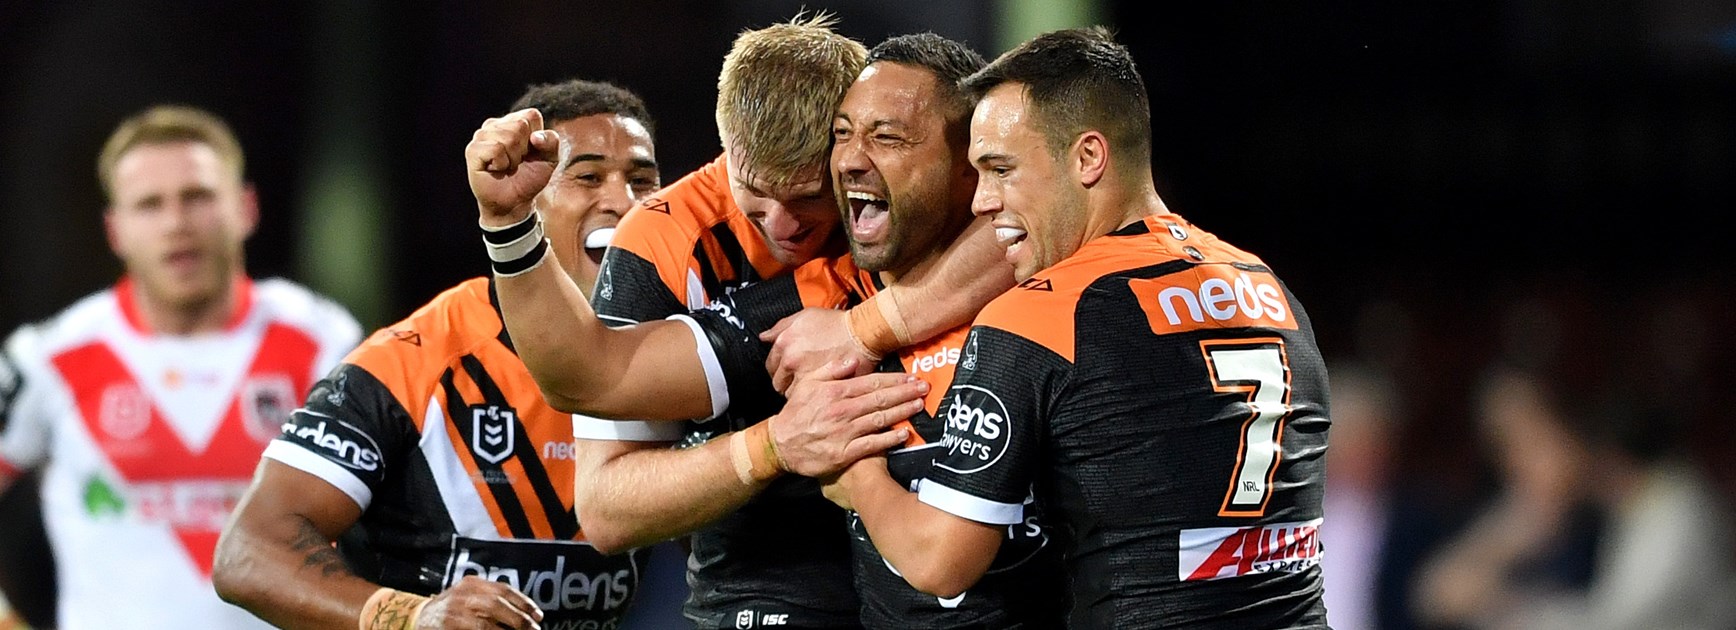 Wests Tigers celebrate a try against the Dragons.